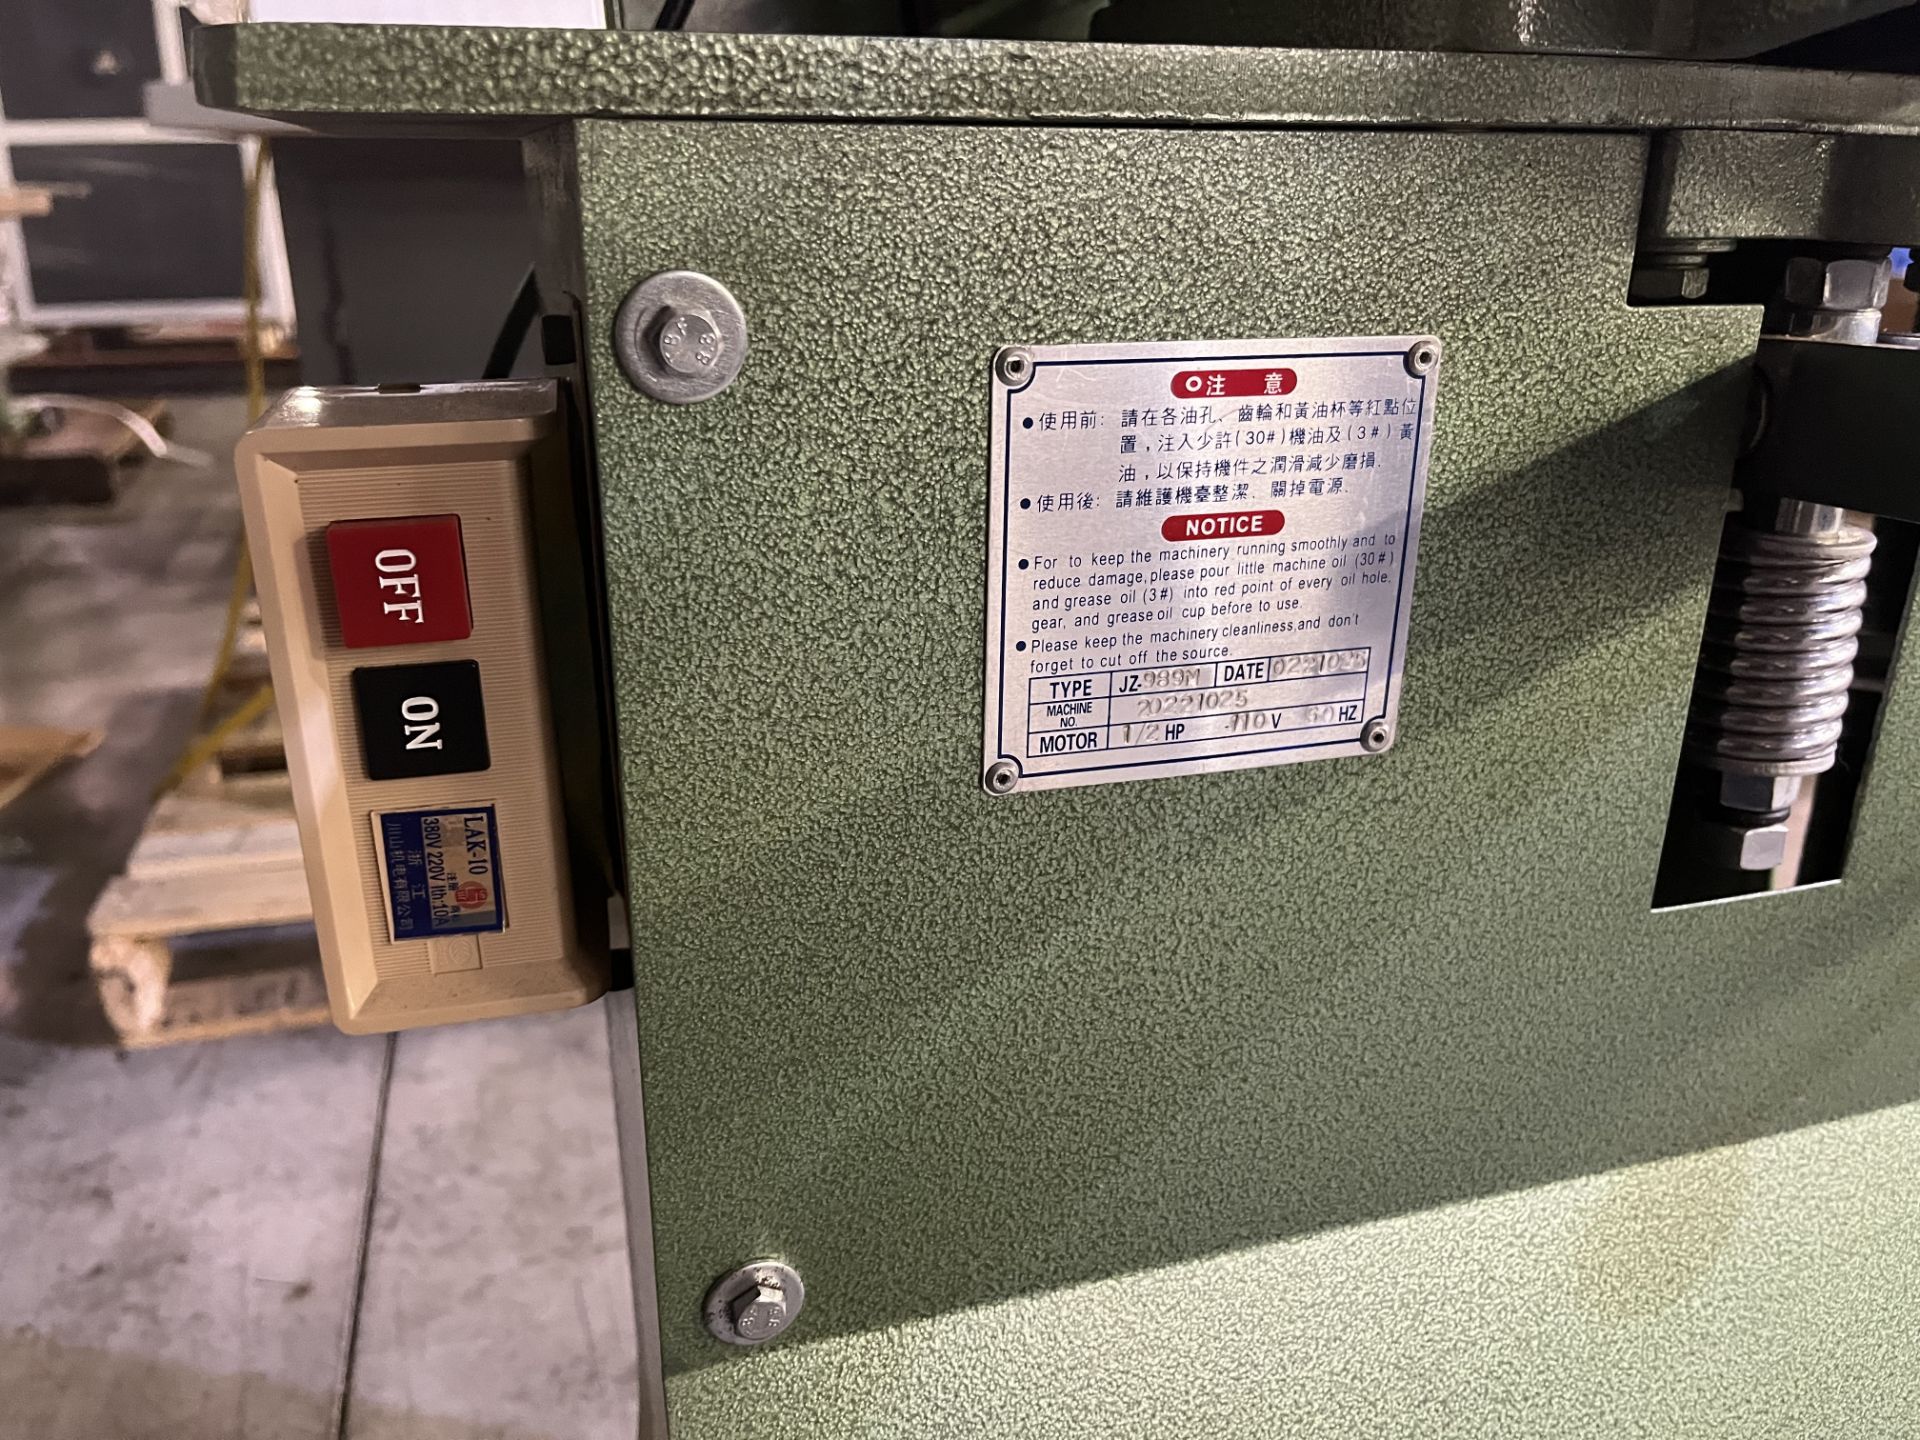 Jiuzhou Machinery Model JZ-989M Automatic Riveting Machine in Good, Working Condition S/N - Image 5 of 6